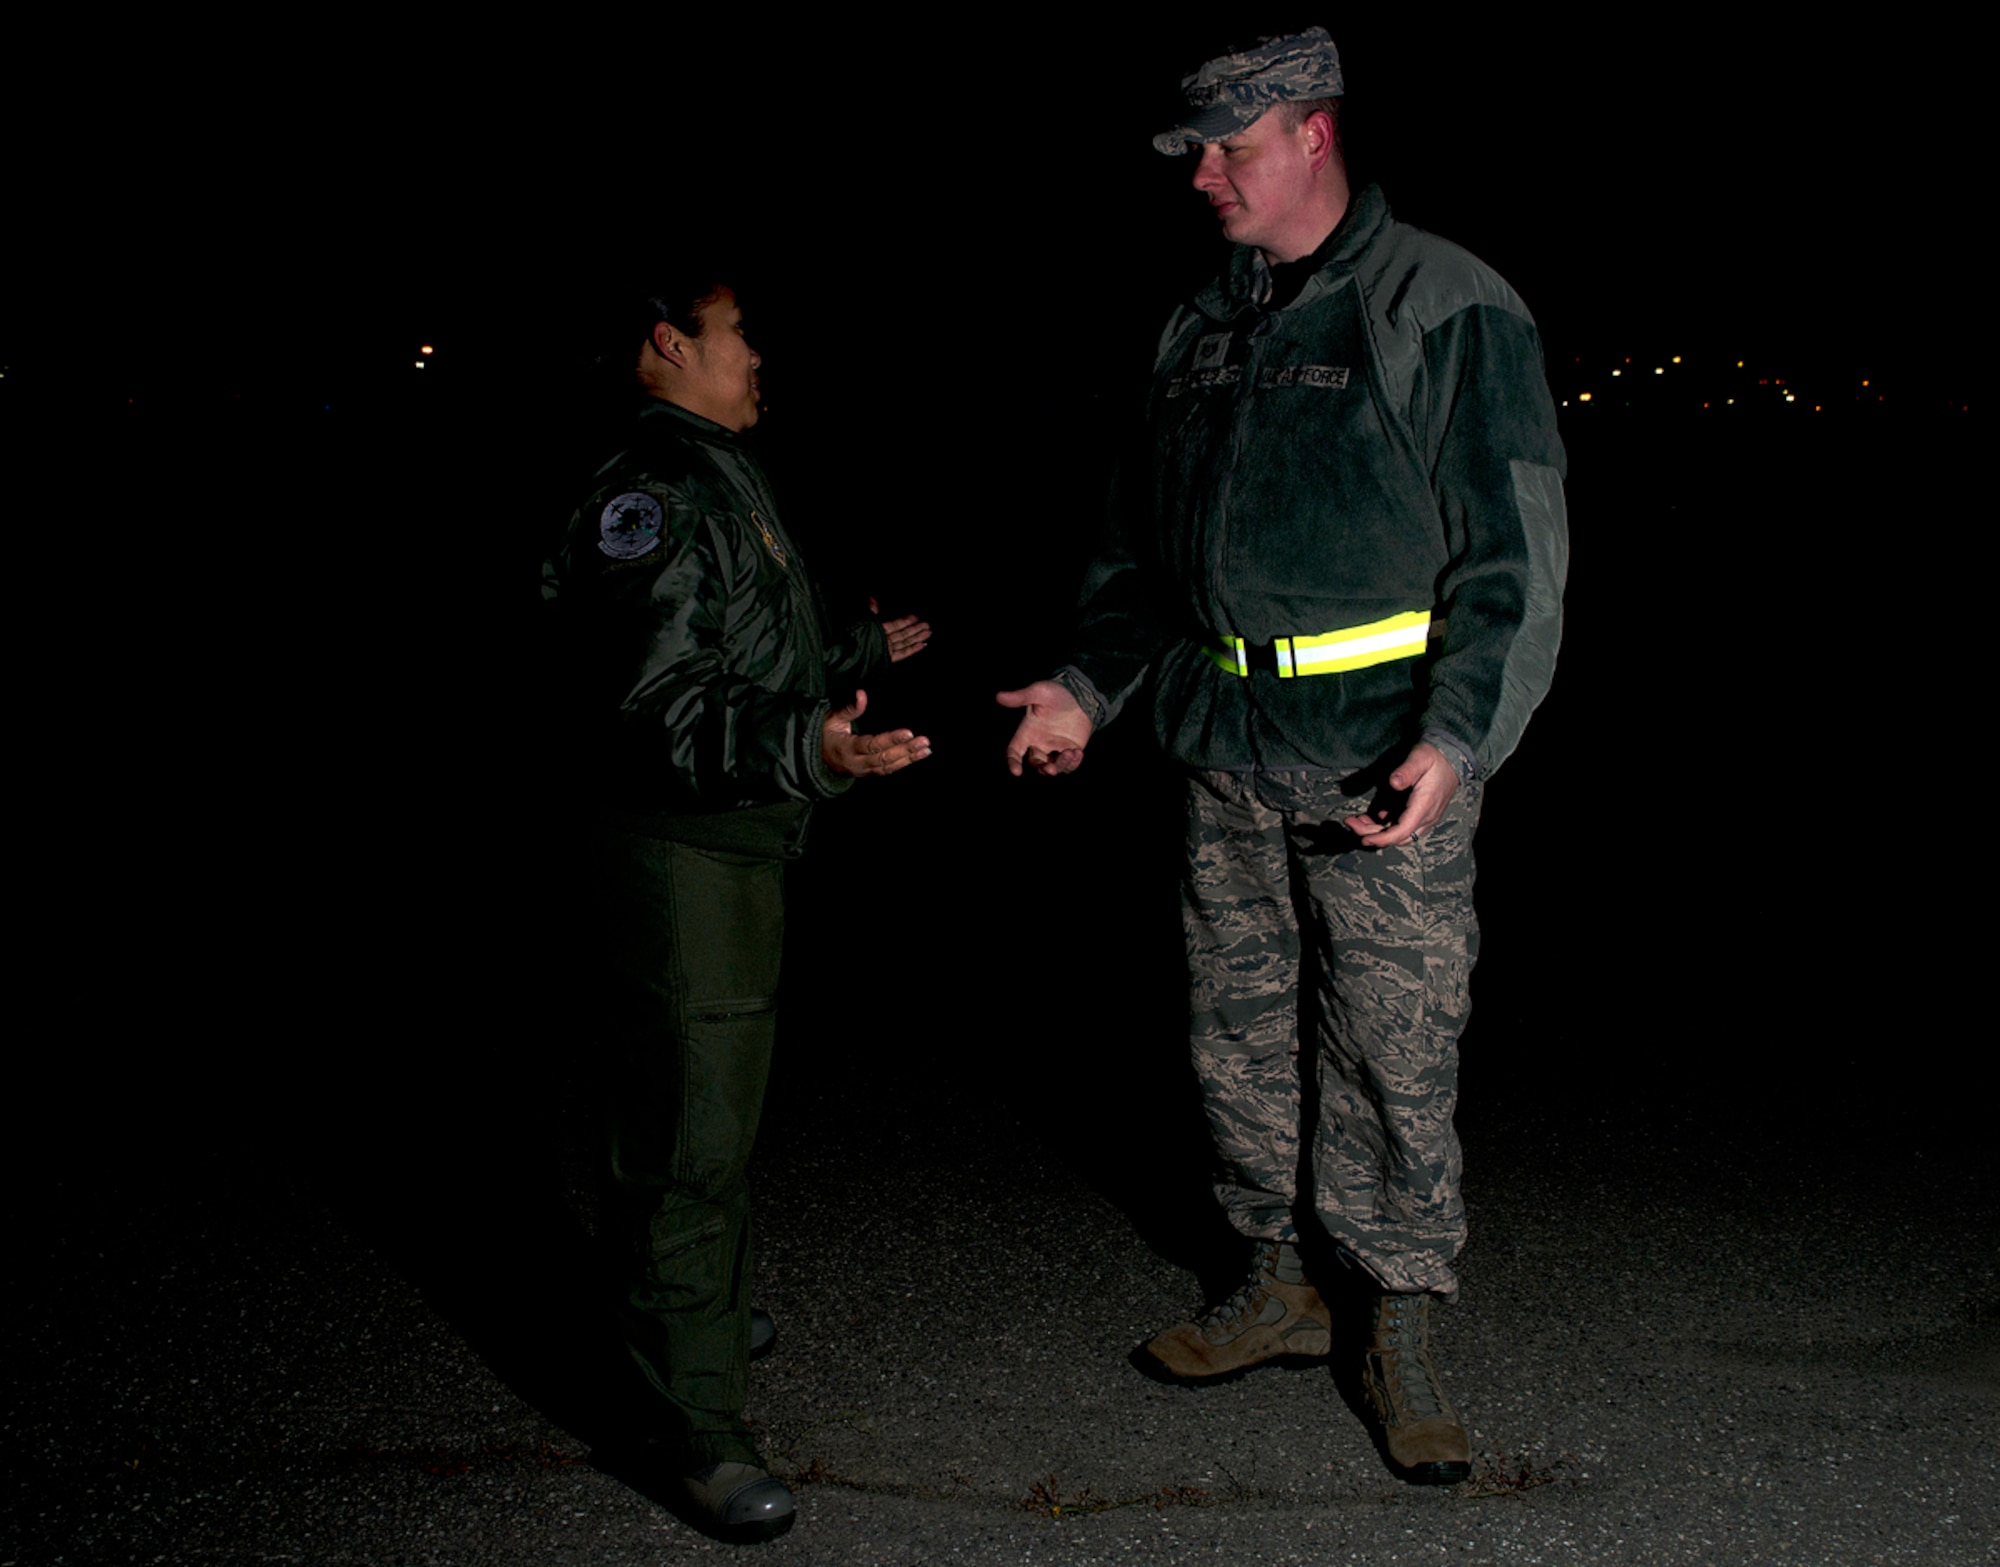 Air Force Staff Sgt. Sheila deVera and Tech. Sgt. Raymond Mills, 673d Air Base Wing Public Affairs photojournalists, demonstrate why wearing a reflective belt to be seen is important. All uniformed military members on Joint Base Elmendorf-Richardson are required to wear reflective belts or a reflective material while outside on base during hours of darkness and inclement weather. Safety officials urge everyone, whether in uniform or not, to abide by this policy. The material used to create a reflective belt bounces light back at the source, making it easier for drivers to see pedestrians and cyclists. A reflective belt is not required while wearing Air Force physical training uniforms, since it is made with reflective material, but Army PT uniforms require reflective belts. JBER instruction 91-202 explains, in detail, when and where reflective belts must be worn, but a good rule of thumb is if it is less than full daylight conditions, wear the belt. (U.S. Air Force photo/Staff Sgt. Zachary Wolf)